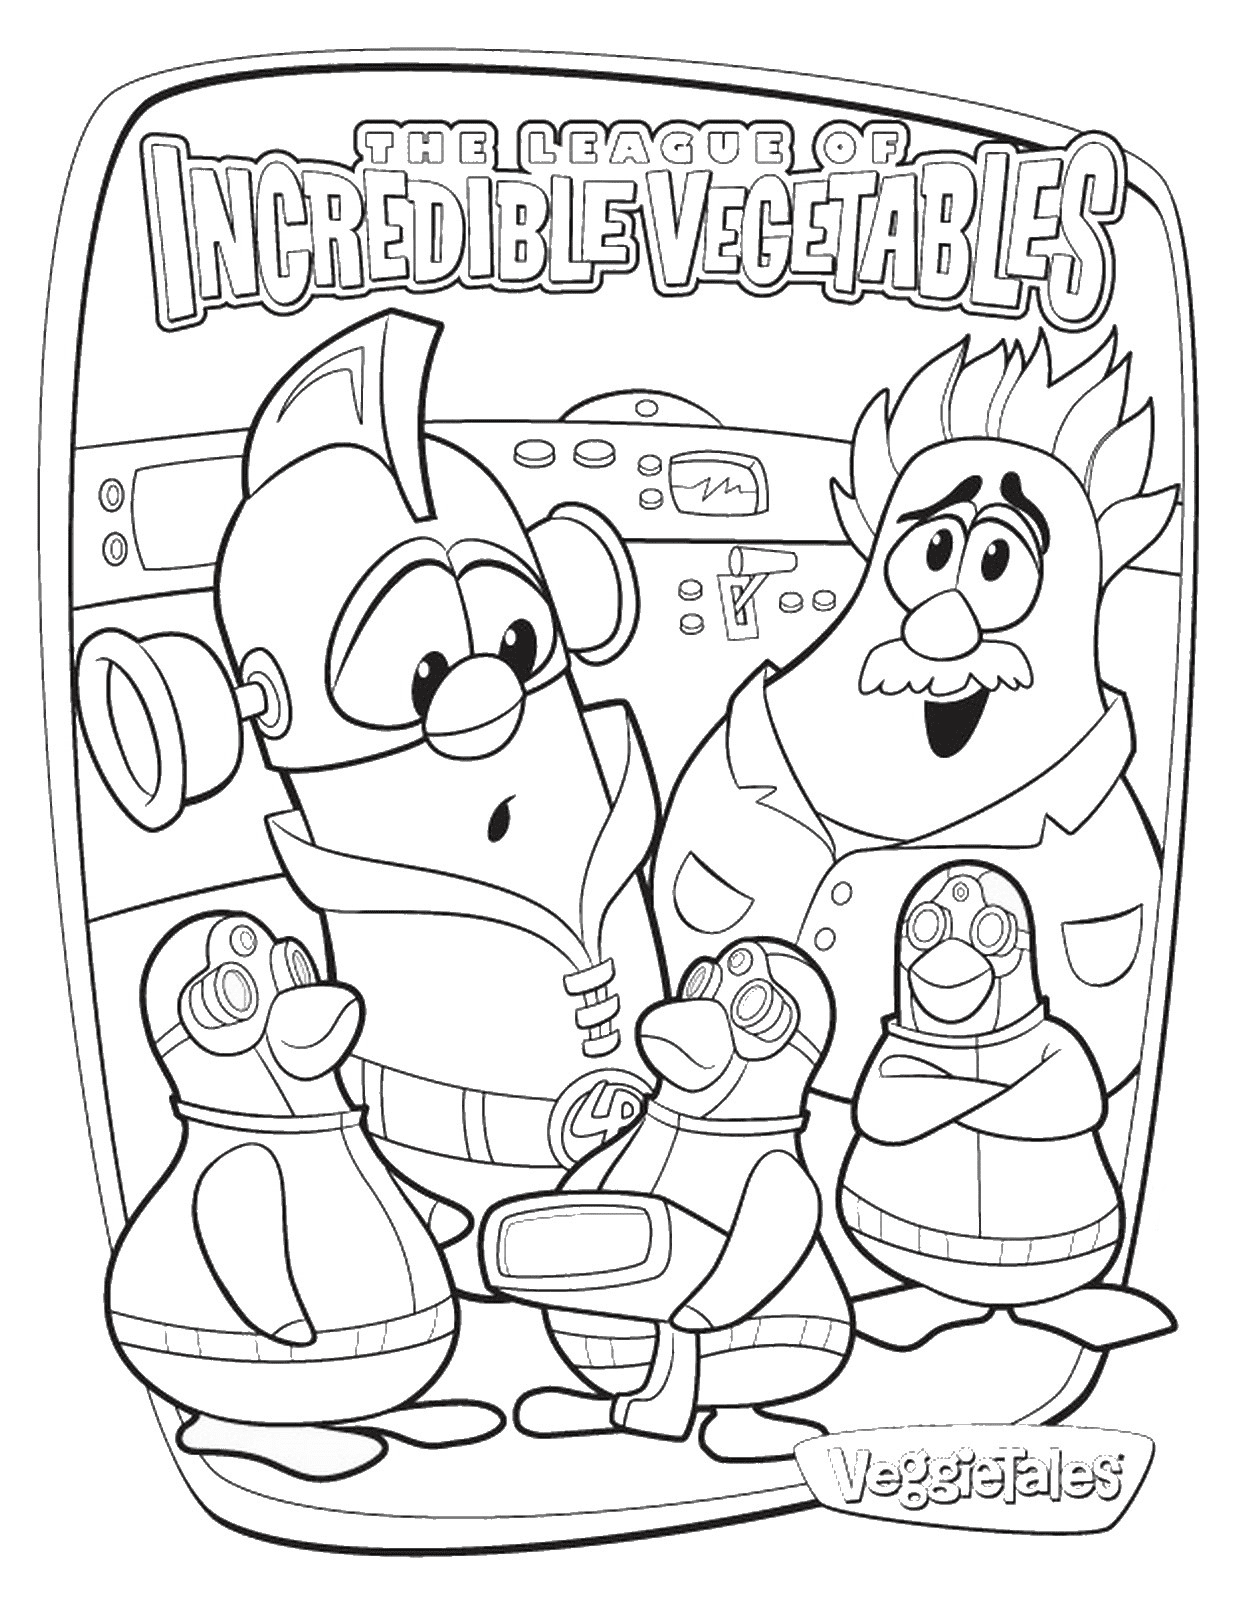 Incredible VeggieTales Coloring Pages